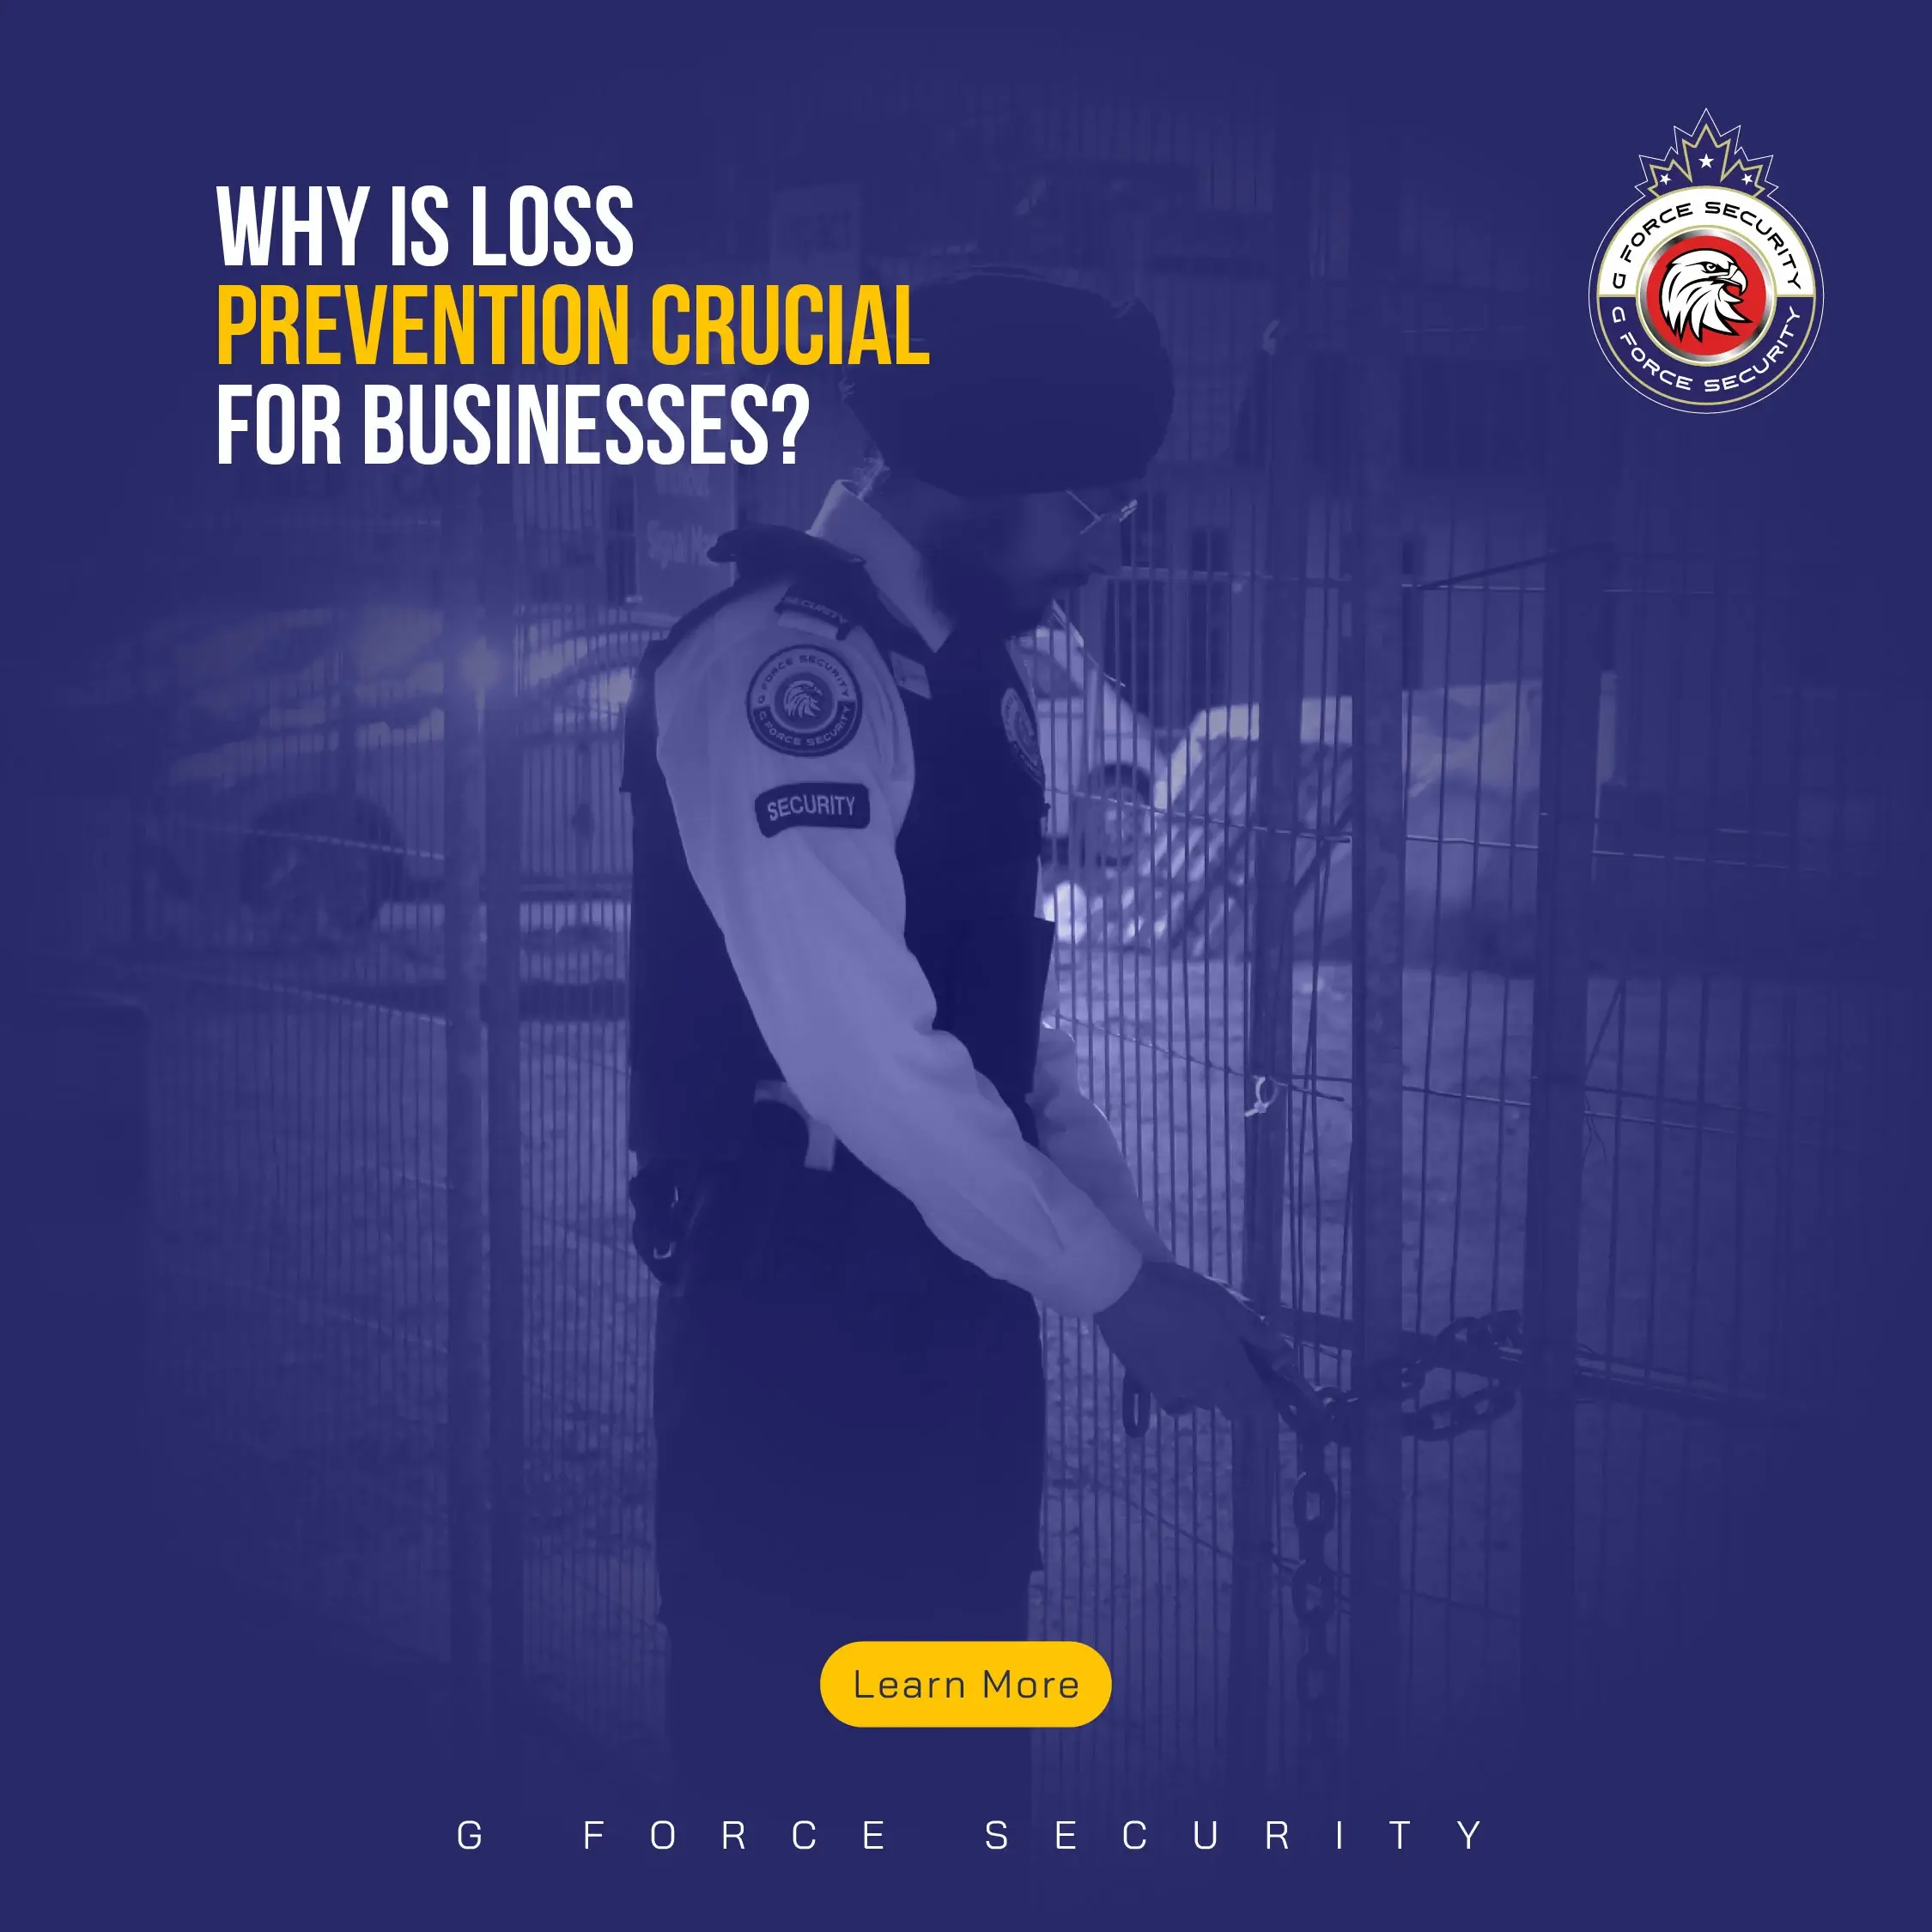 Why is Loss Prevention Crucial for Businesses?